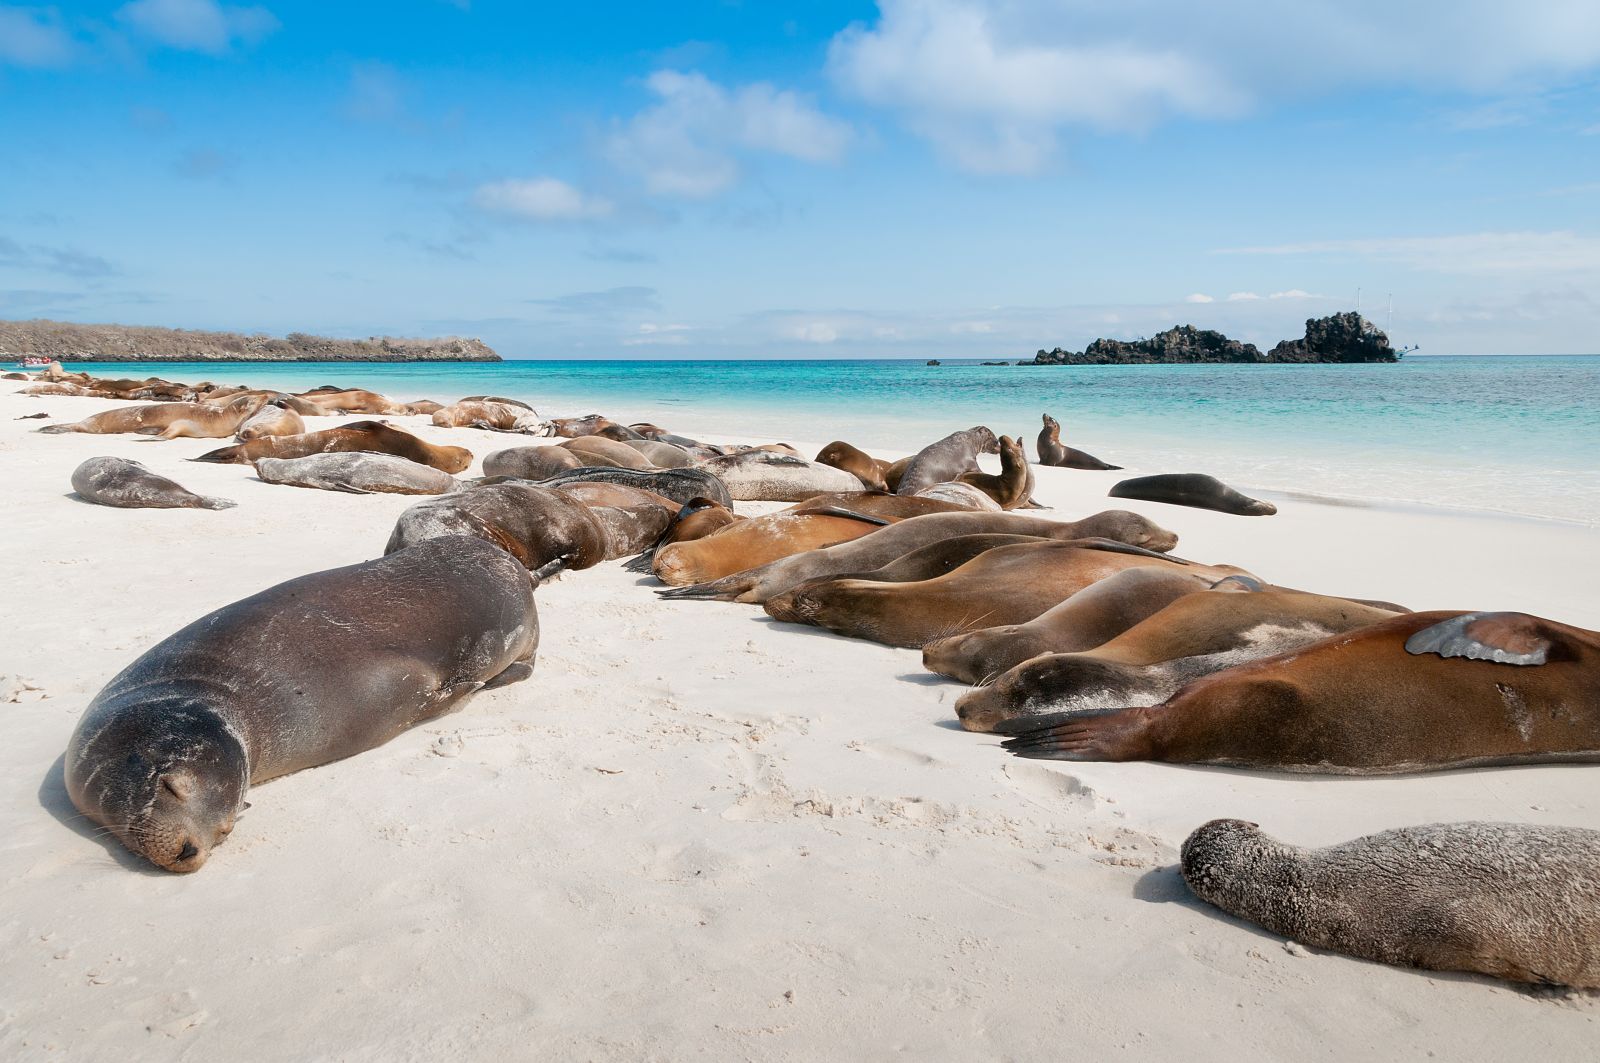 Sea lions basking on the beach in the Galapagos Islands